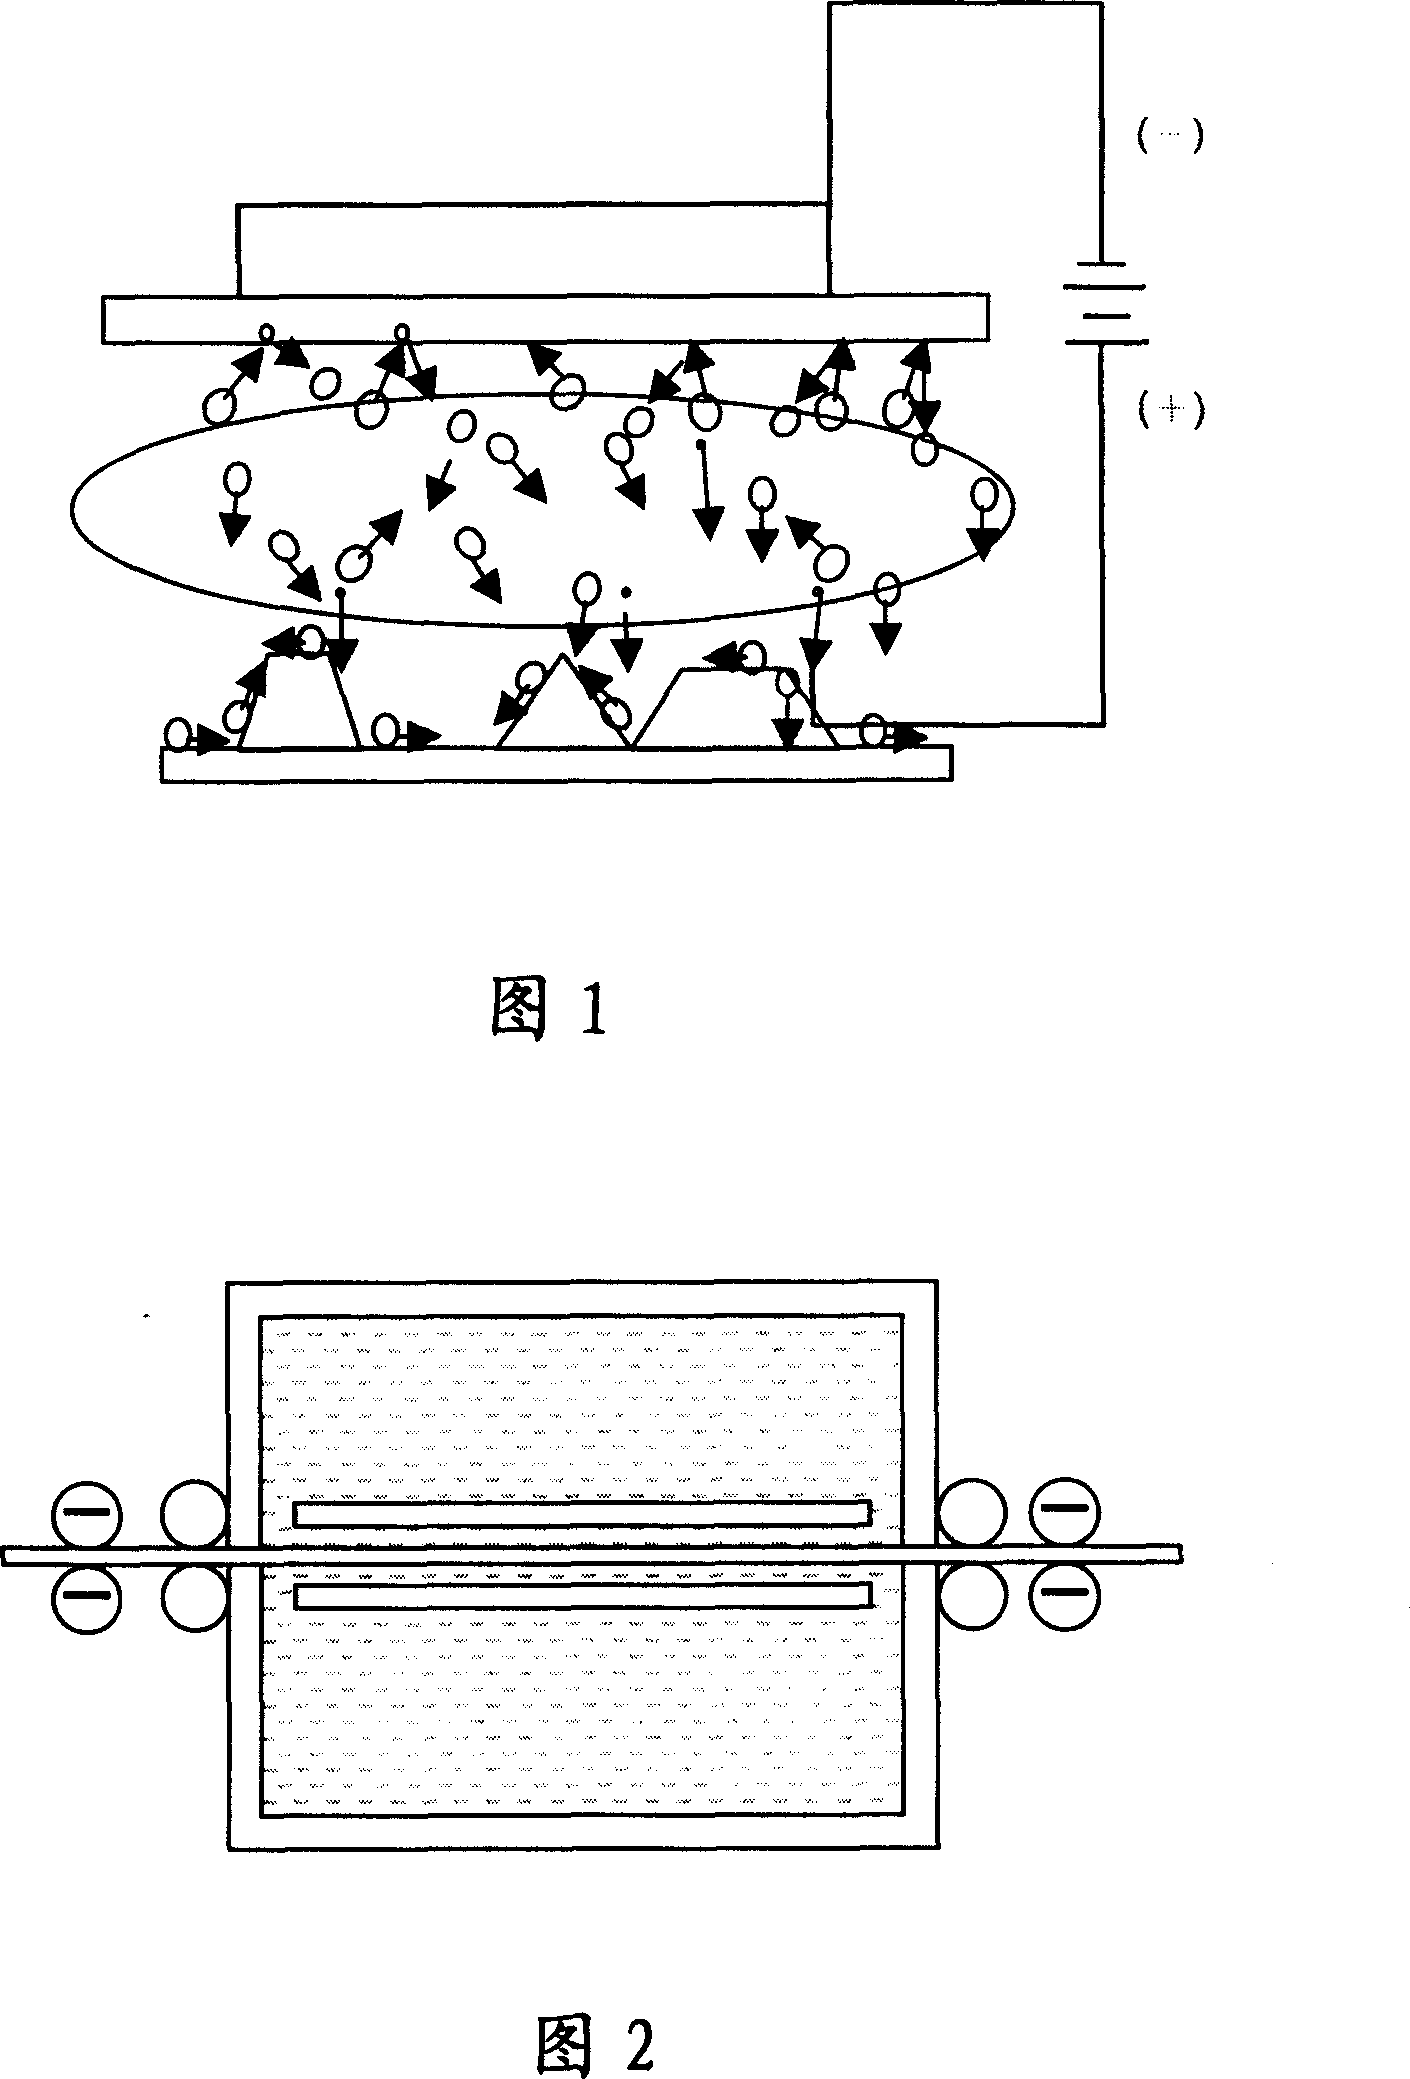 Method of horizontally plating, electrodepositing or electrodeless plating processing on substrate